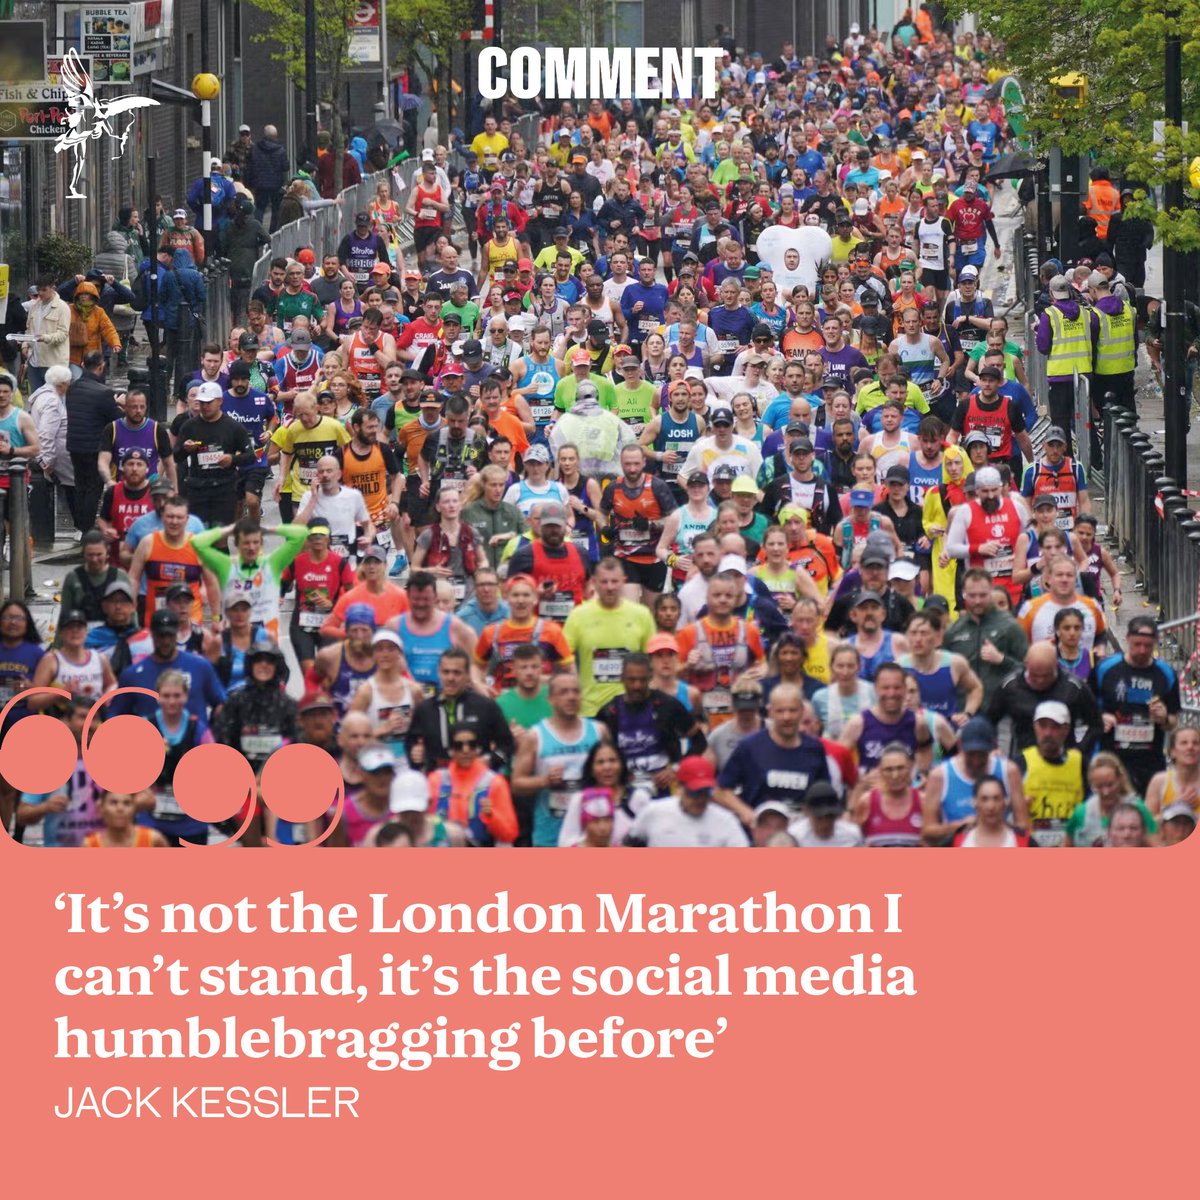 'The old joke about how do you know if someone is from Yorkshire (they’ll tell you) applies double to marathon runners,' writes @JackKessler1 Read more: standard.co.uk/comment/london…